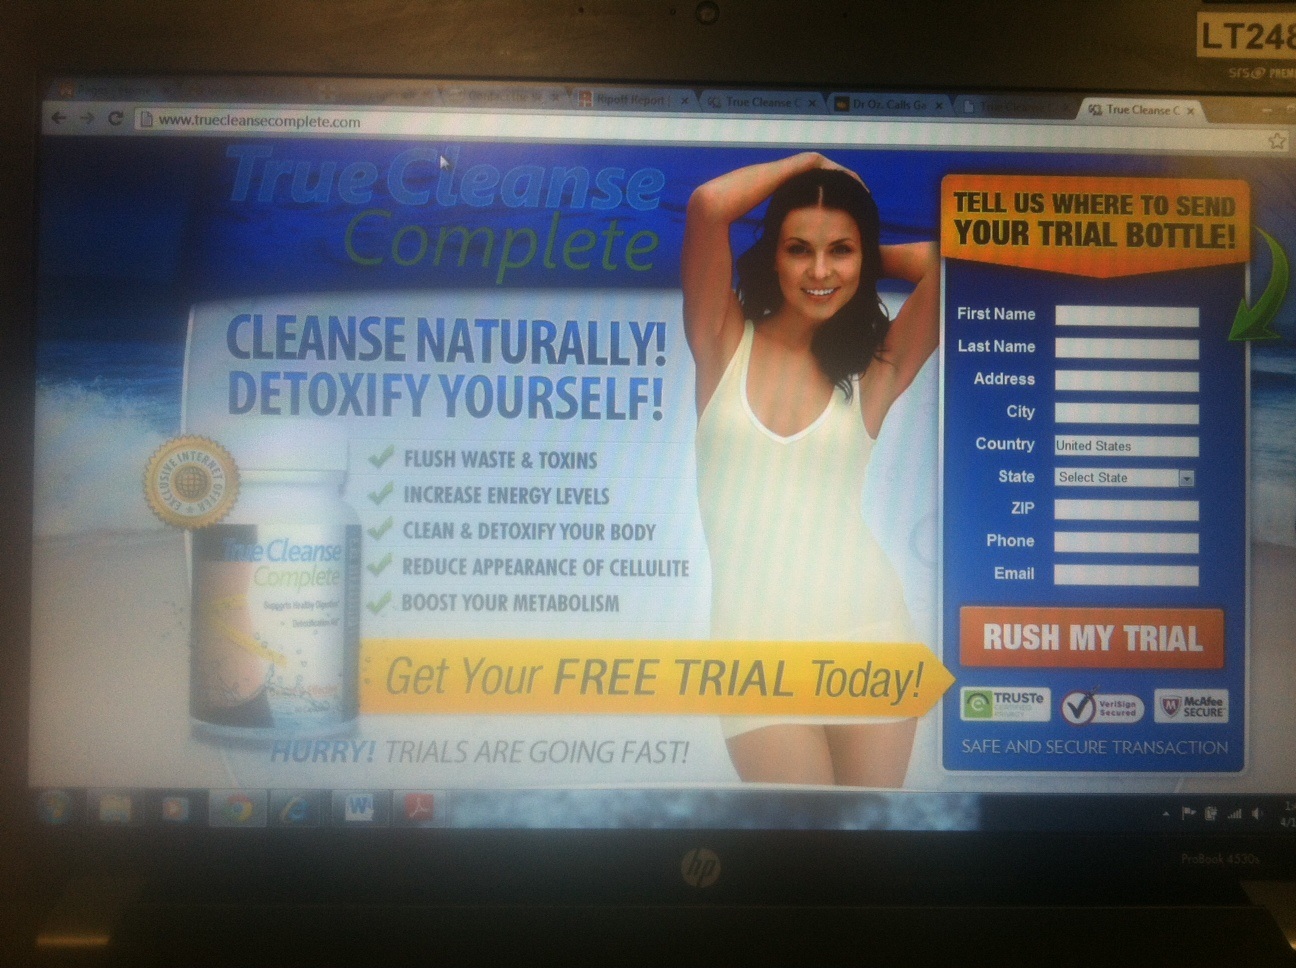 Screen Shot Of truecleansecomplete.com home page showing "FREE Trial Offer" false claim